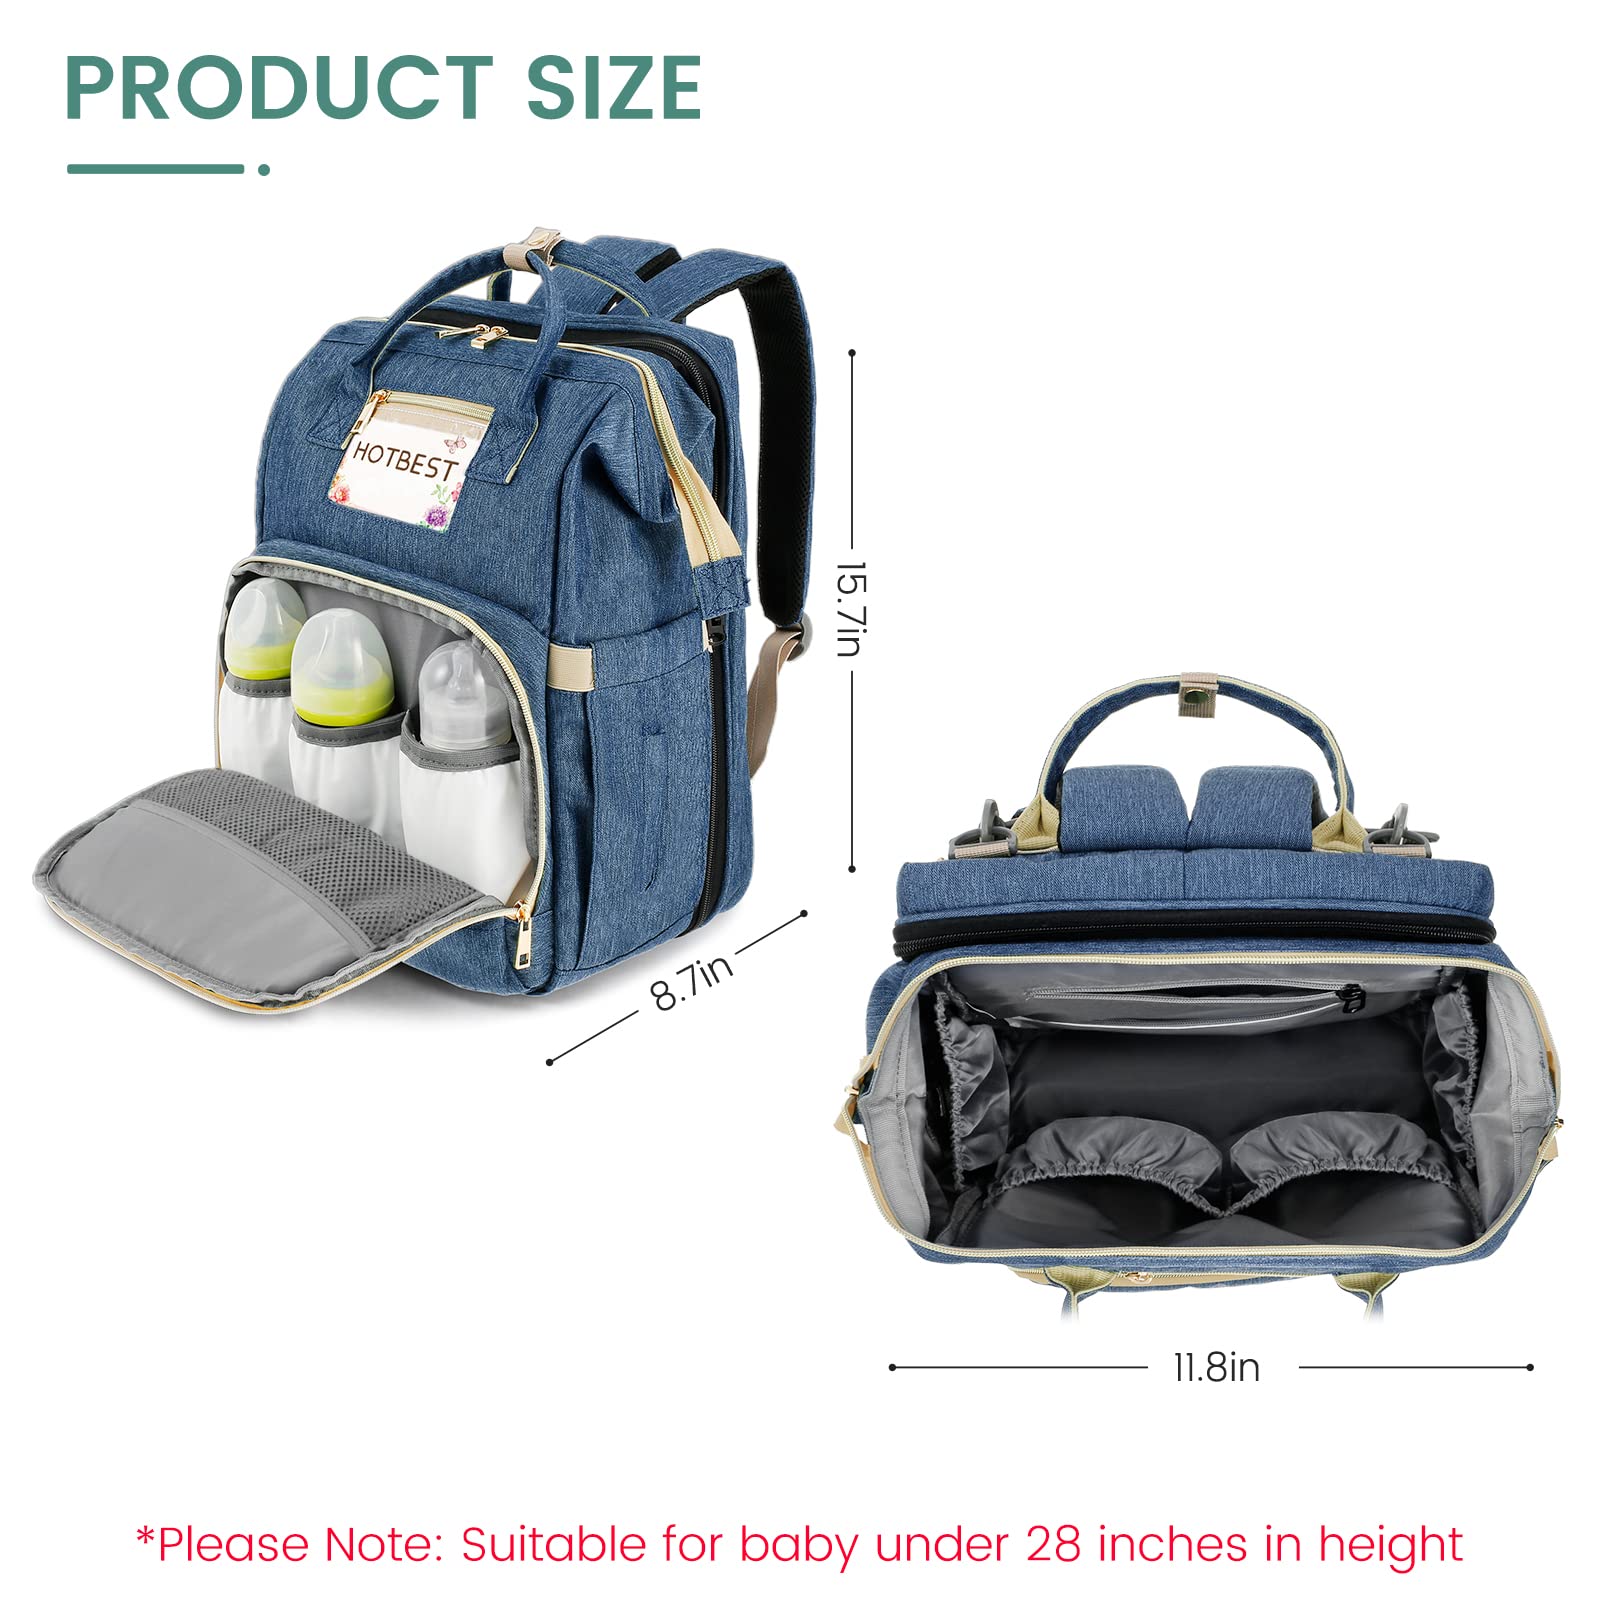 HOTBEST Diaper Bag Backpack, Large Baby Bag, Nappy Changing Bags with Changing Pad, Multifunction Waterproof Travel Essentials Baby Bag with USB port, Unisex and Stylish(Haze Blue)